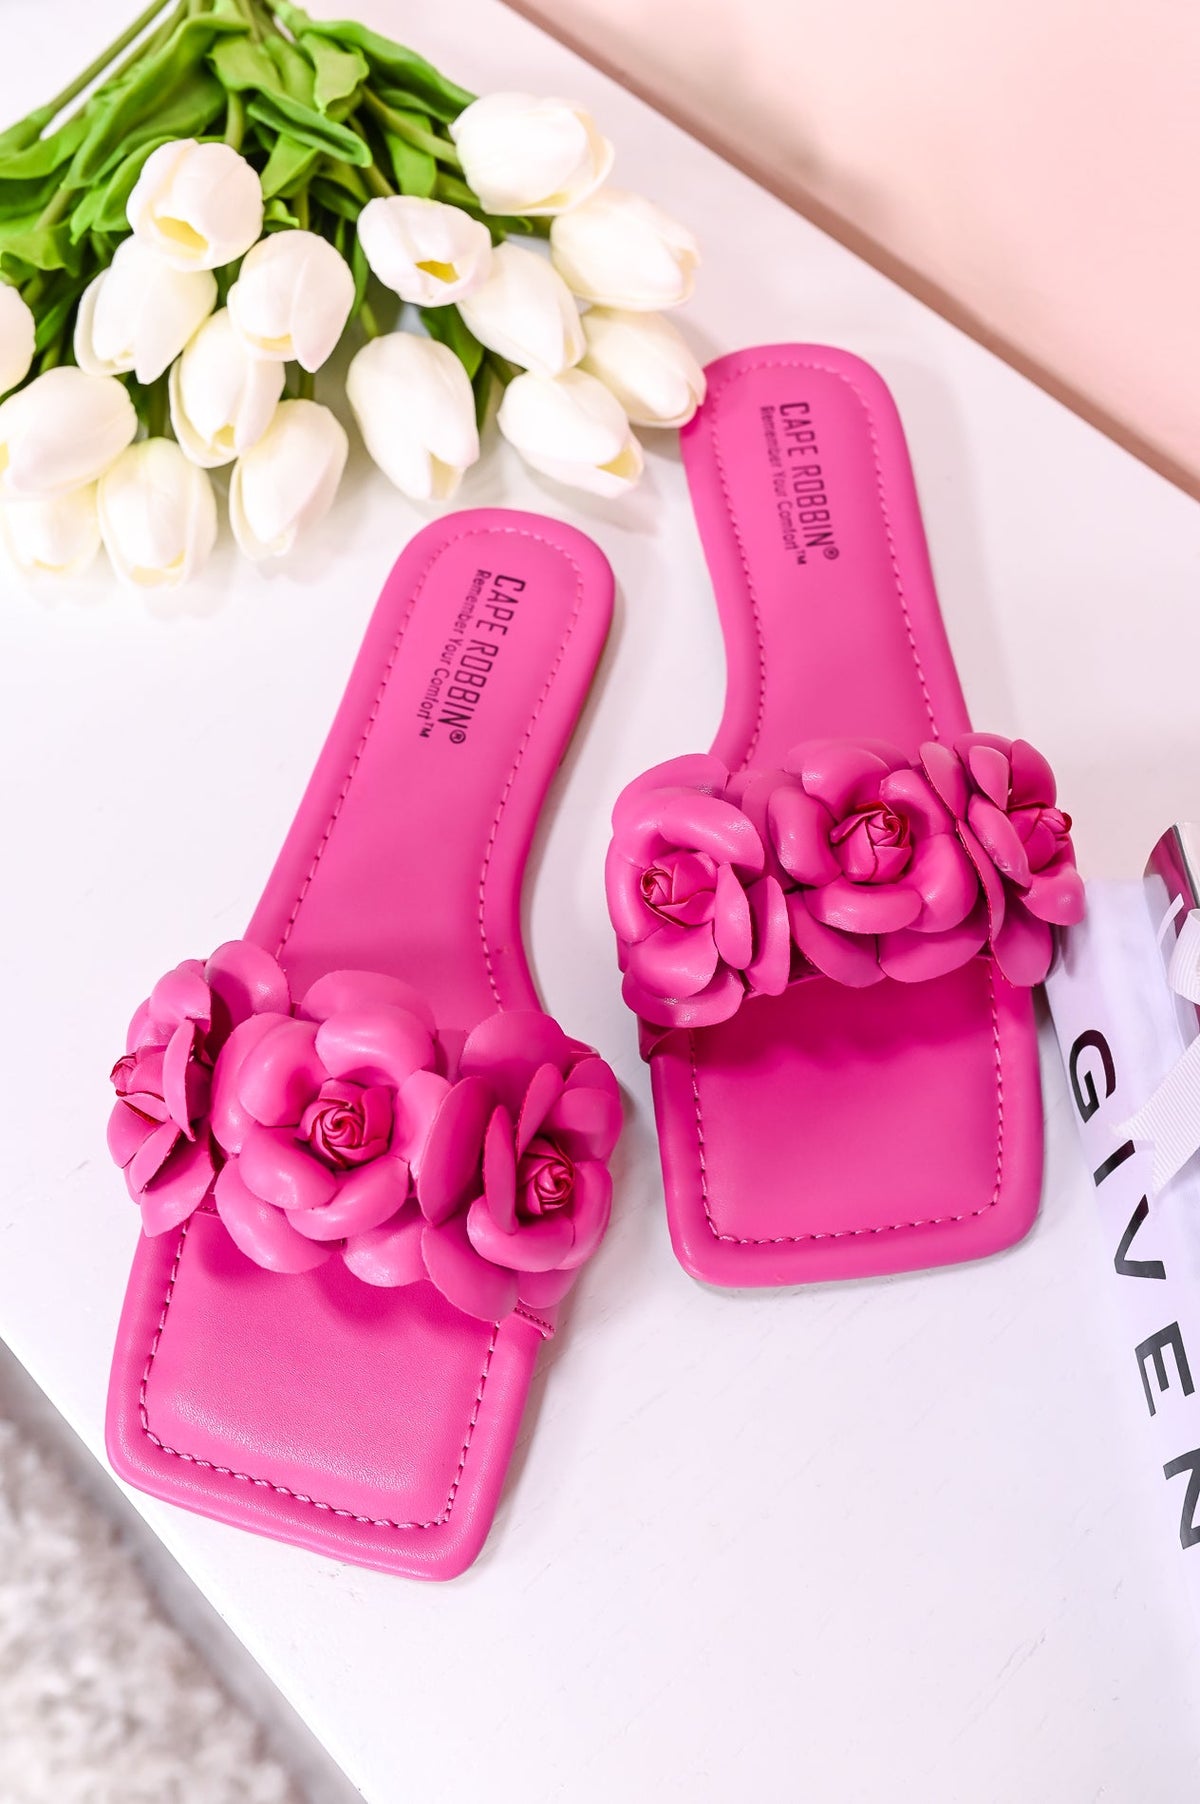 The Girl Who Has Everything Fuchsia Floral Slip On Sandals - SHO2352FU